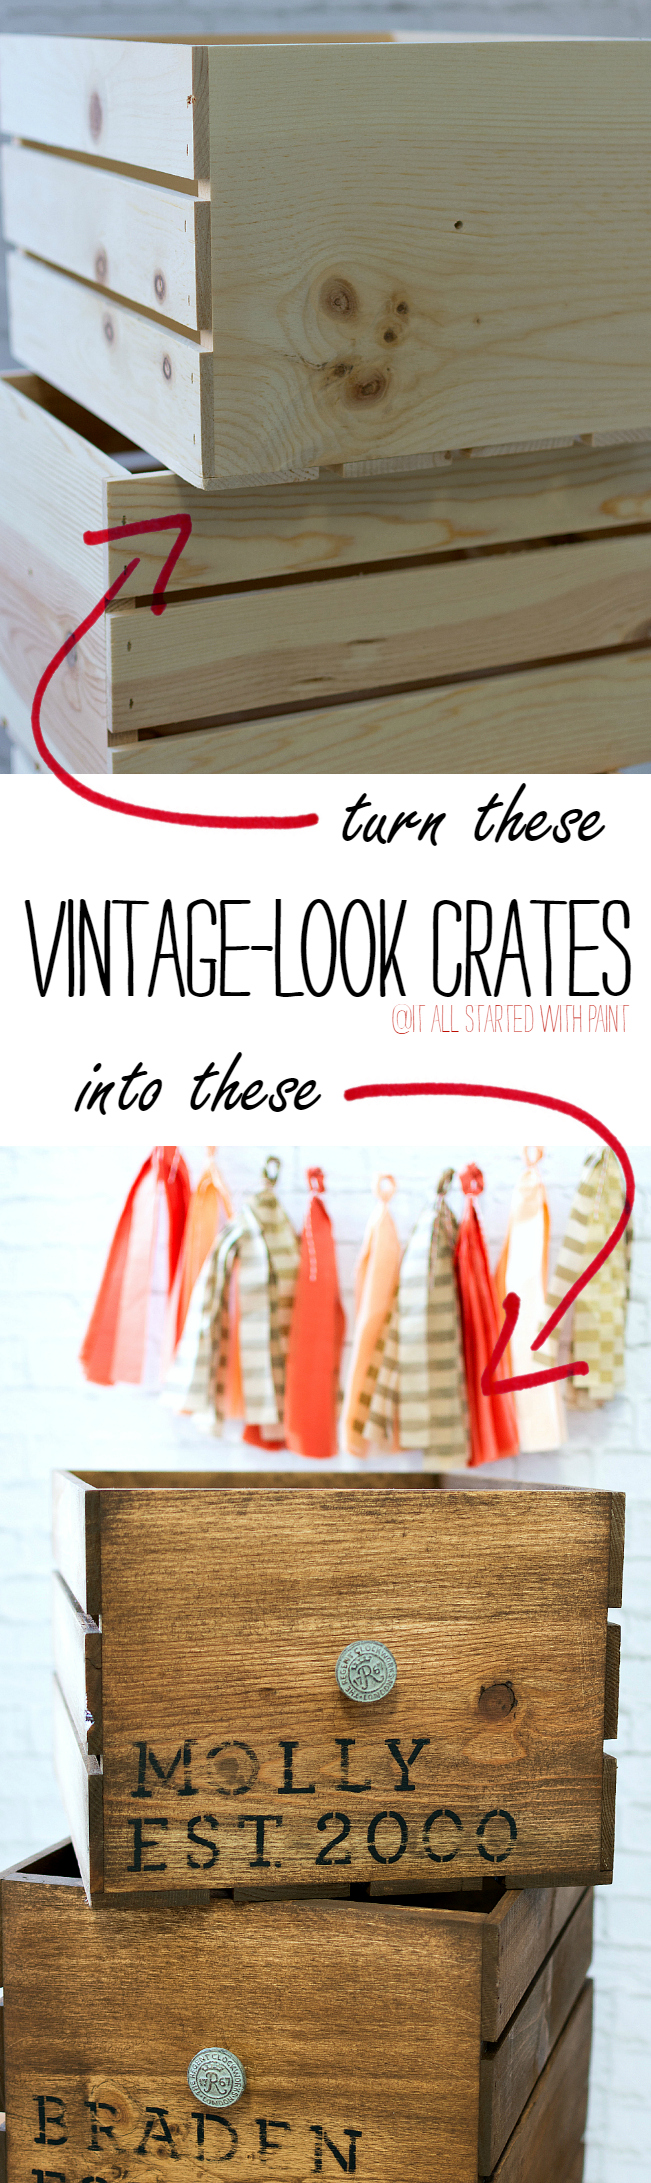 How To Age New Crates to Look Vintage